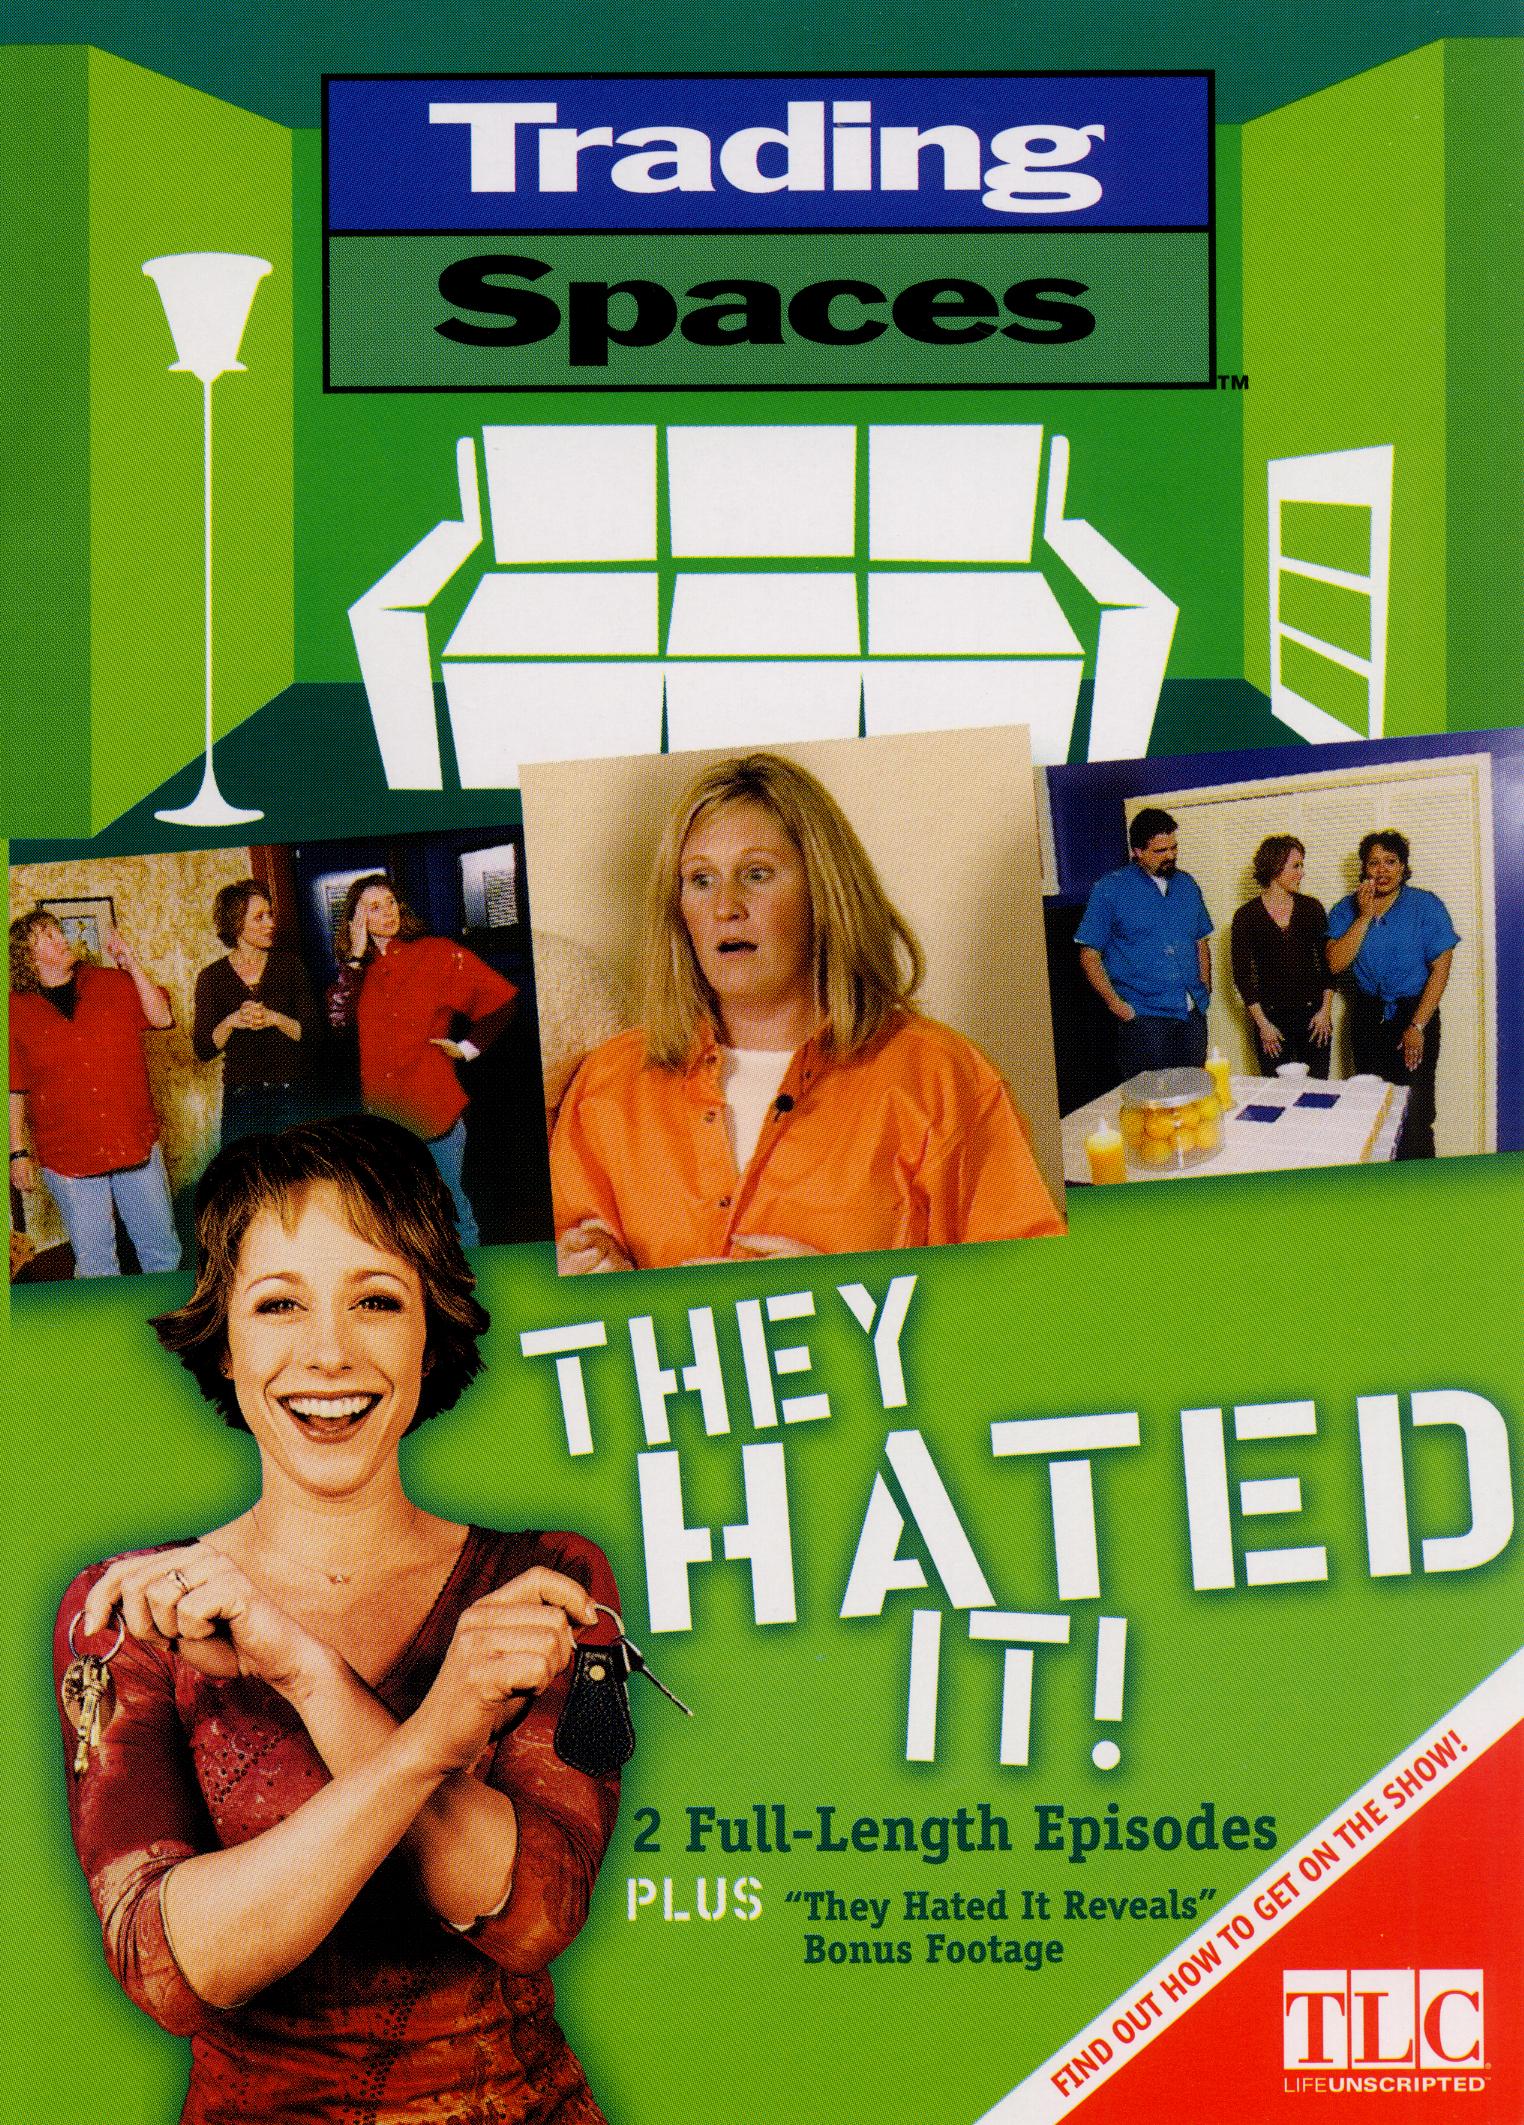 Trading Spaces